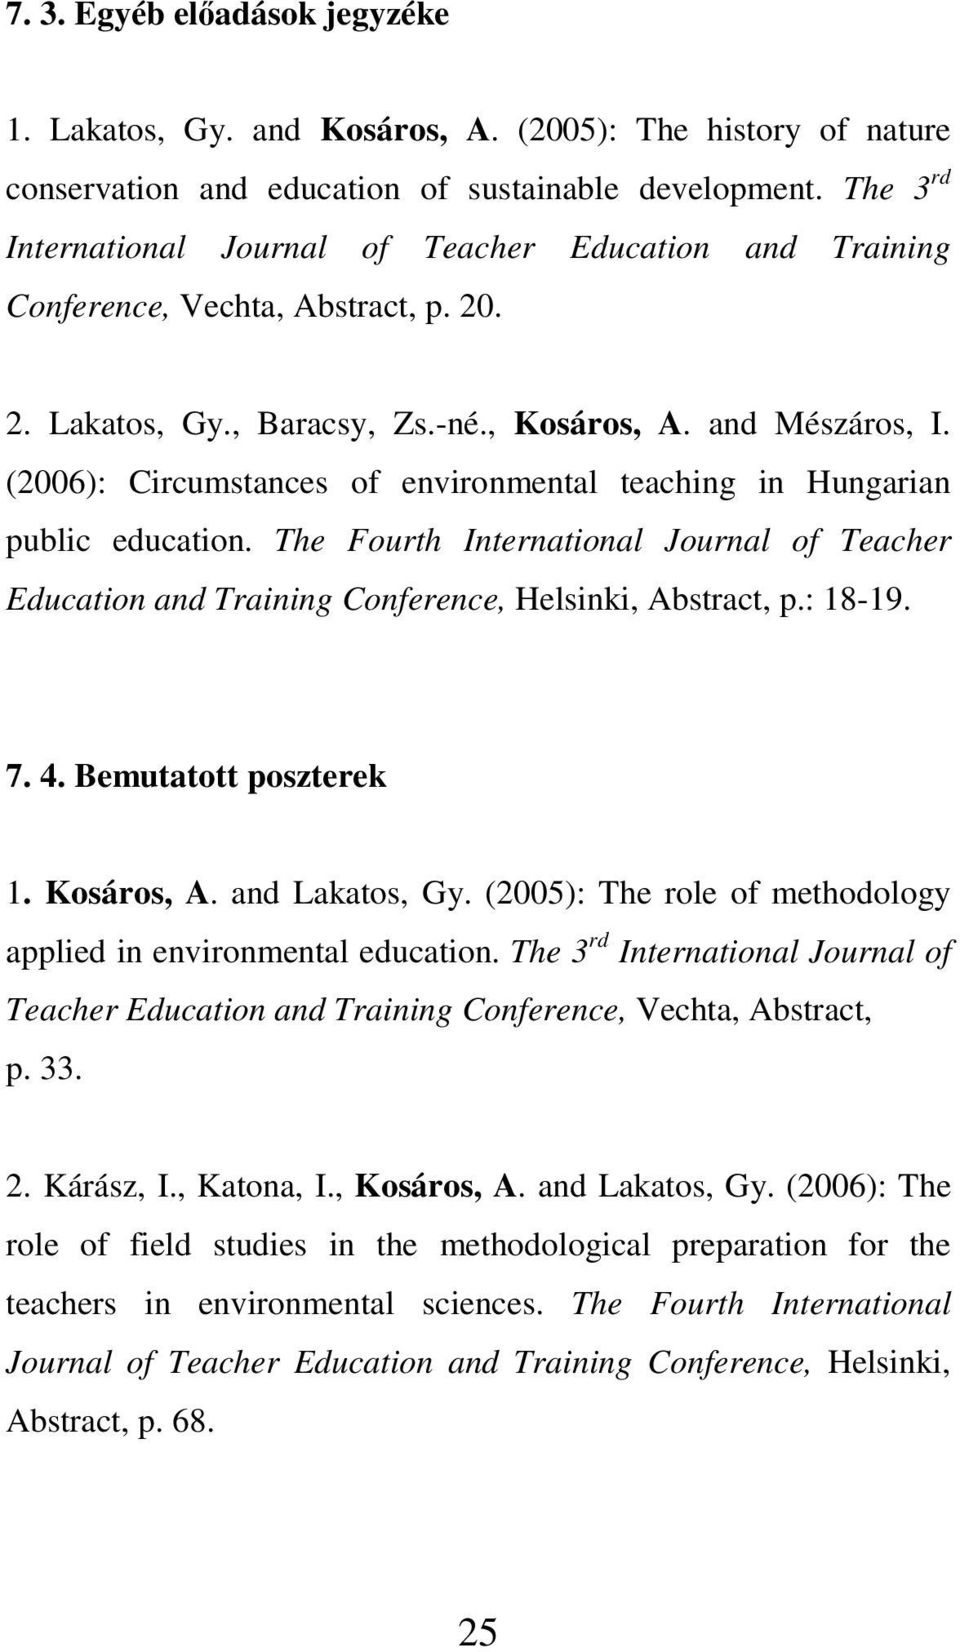 (2006): Circumstances of environmental teaching in Hungarian public education. The Fourth International Journal of Teacher Education and Training Conference, Helsinki, Abstract, p.: 18-19. 7. 4.